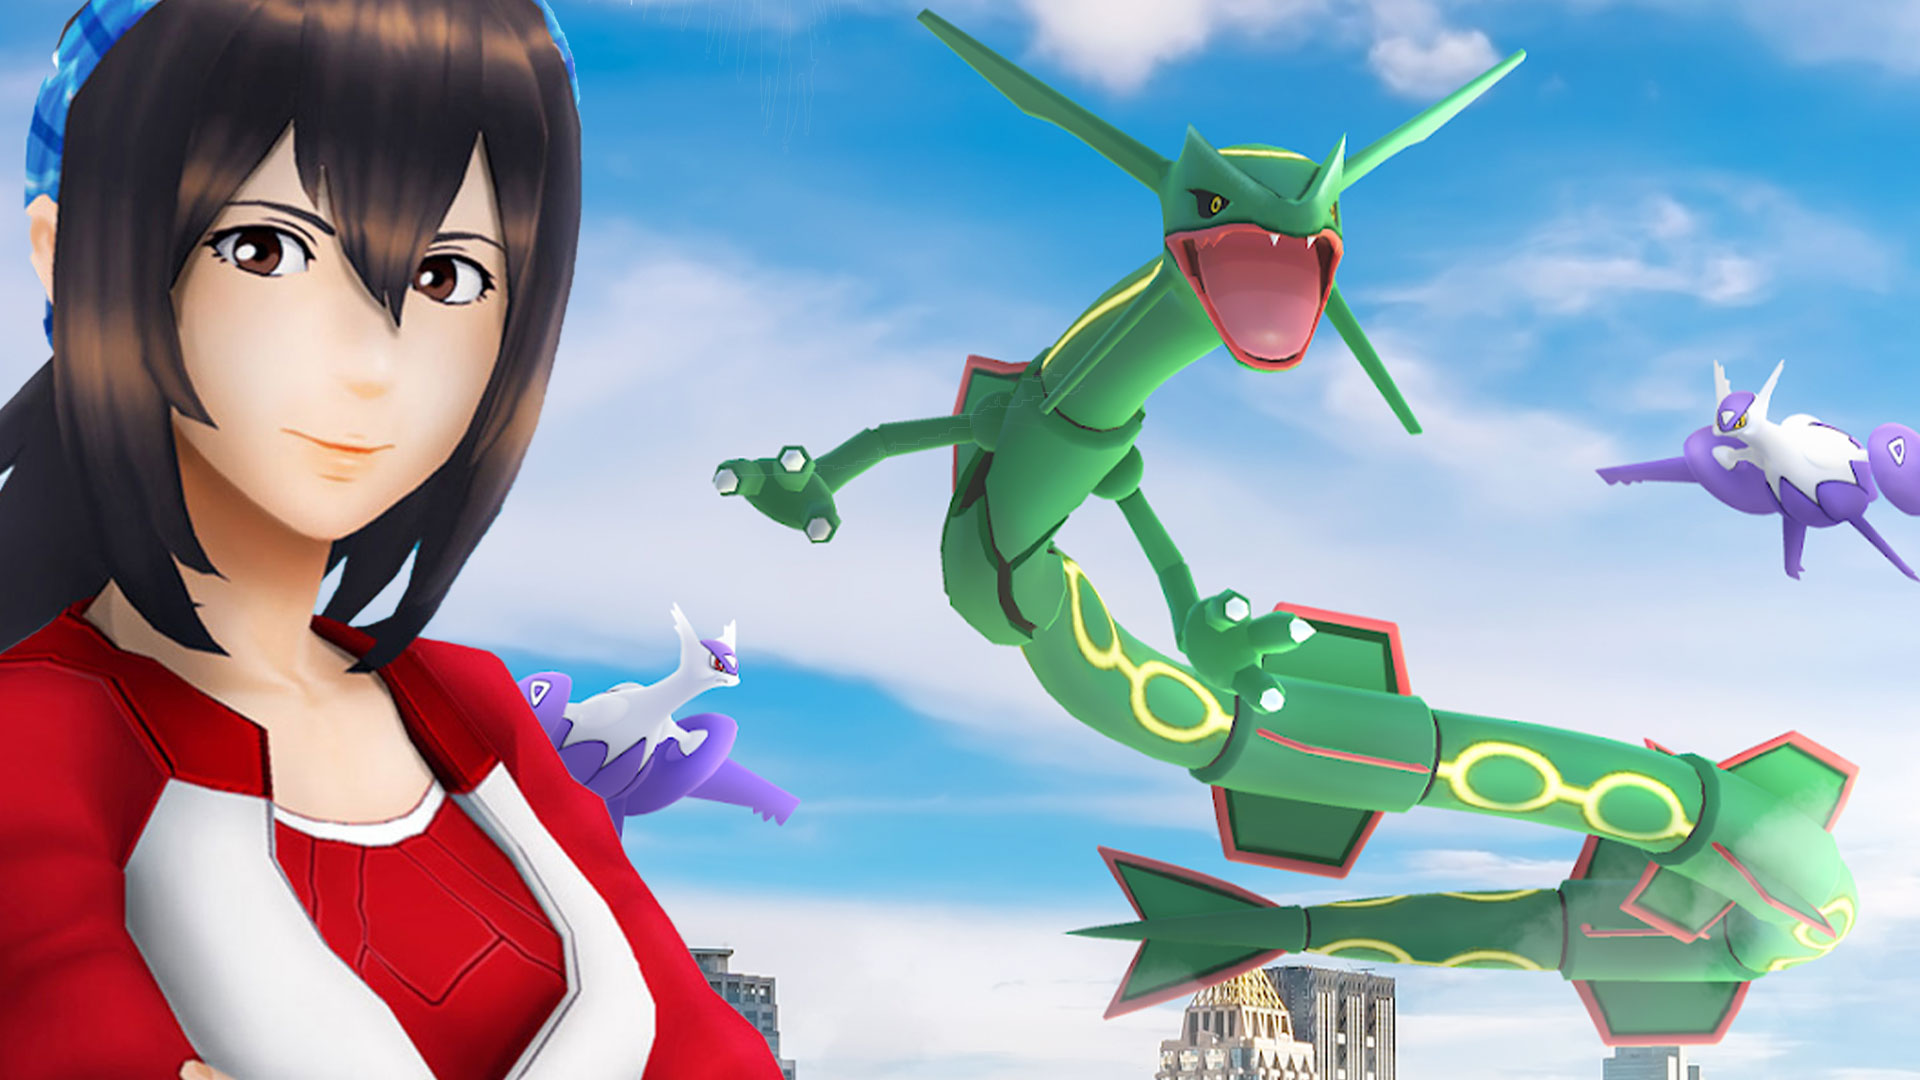 Pokémon GO: Tomorrow starts the Proto-Rumble event with Rayquaza - All spawns and bonuses